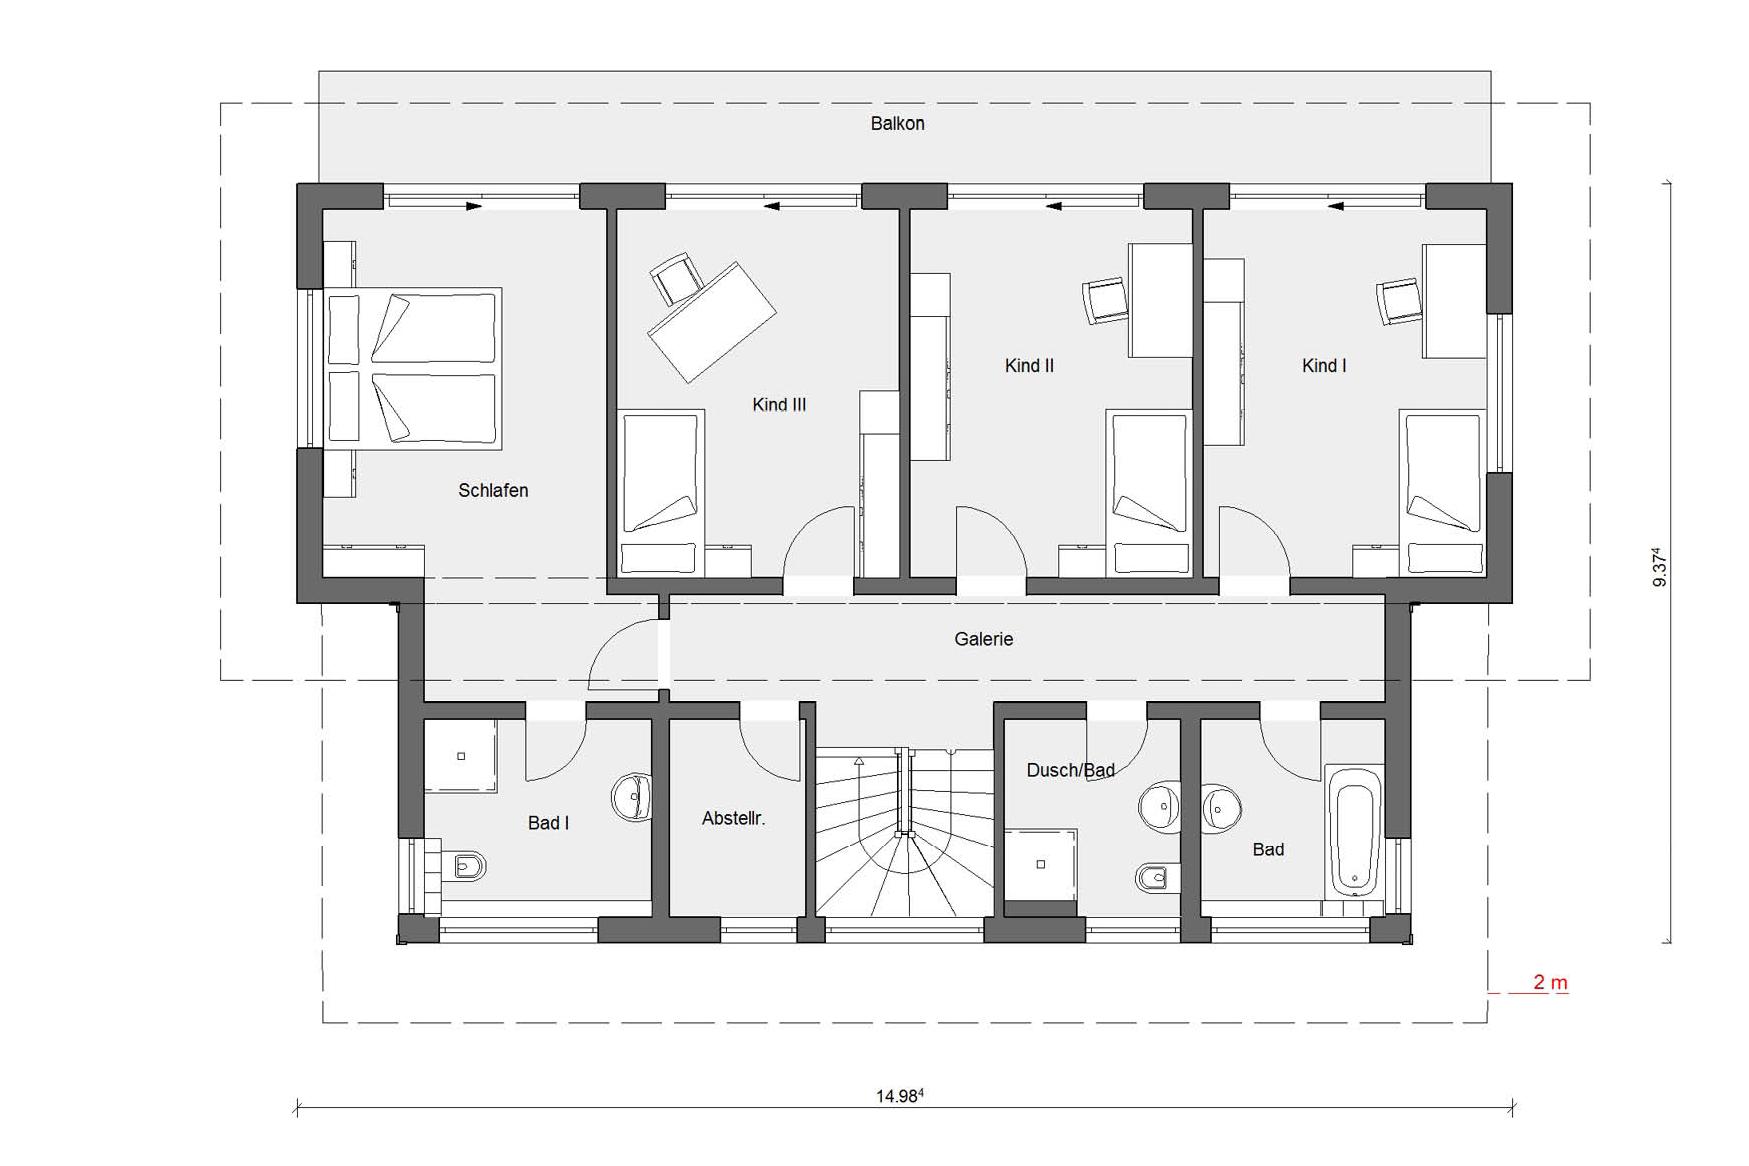 Floor plan attic E 15-217.1 prefabricated house with 200sqm